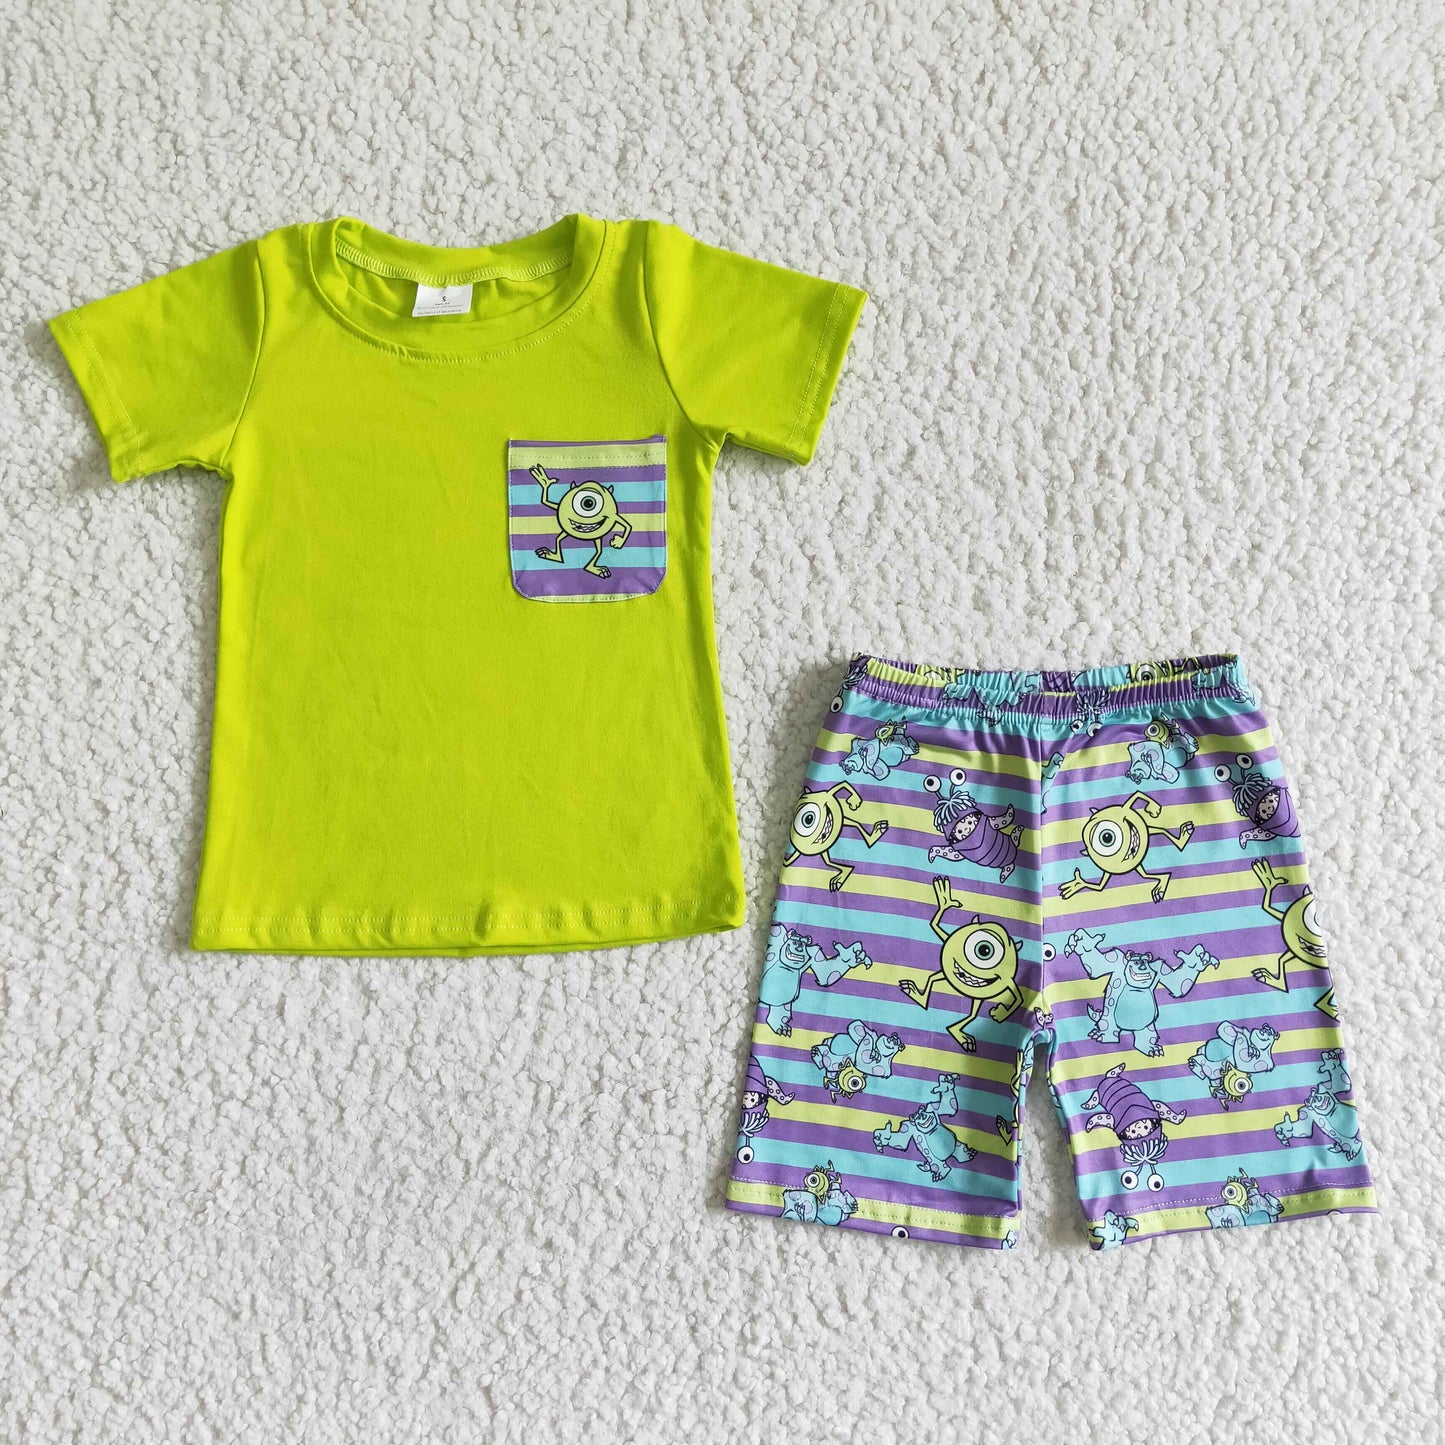 boy's clothes monster cartoon shorts set outfit